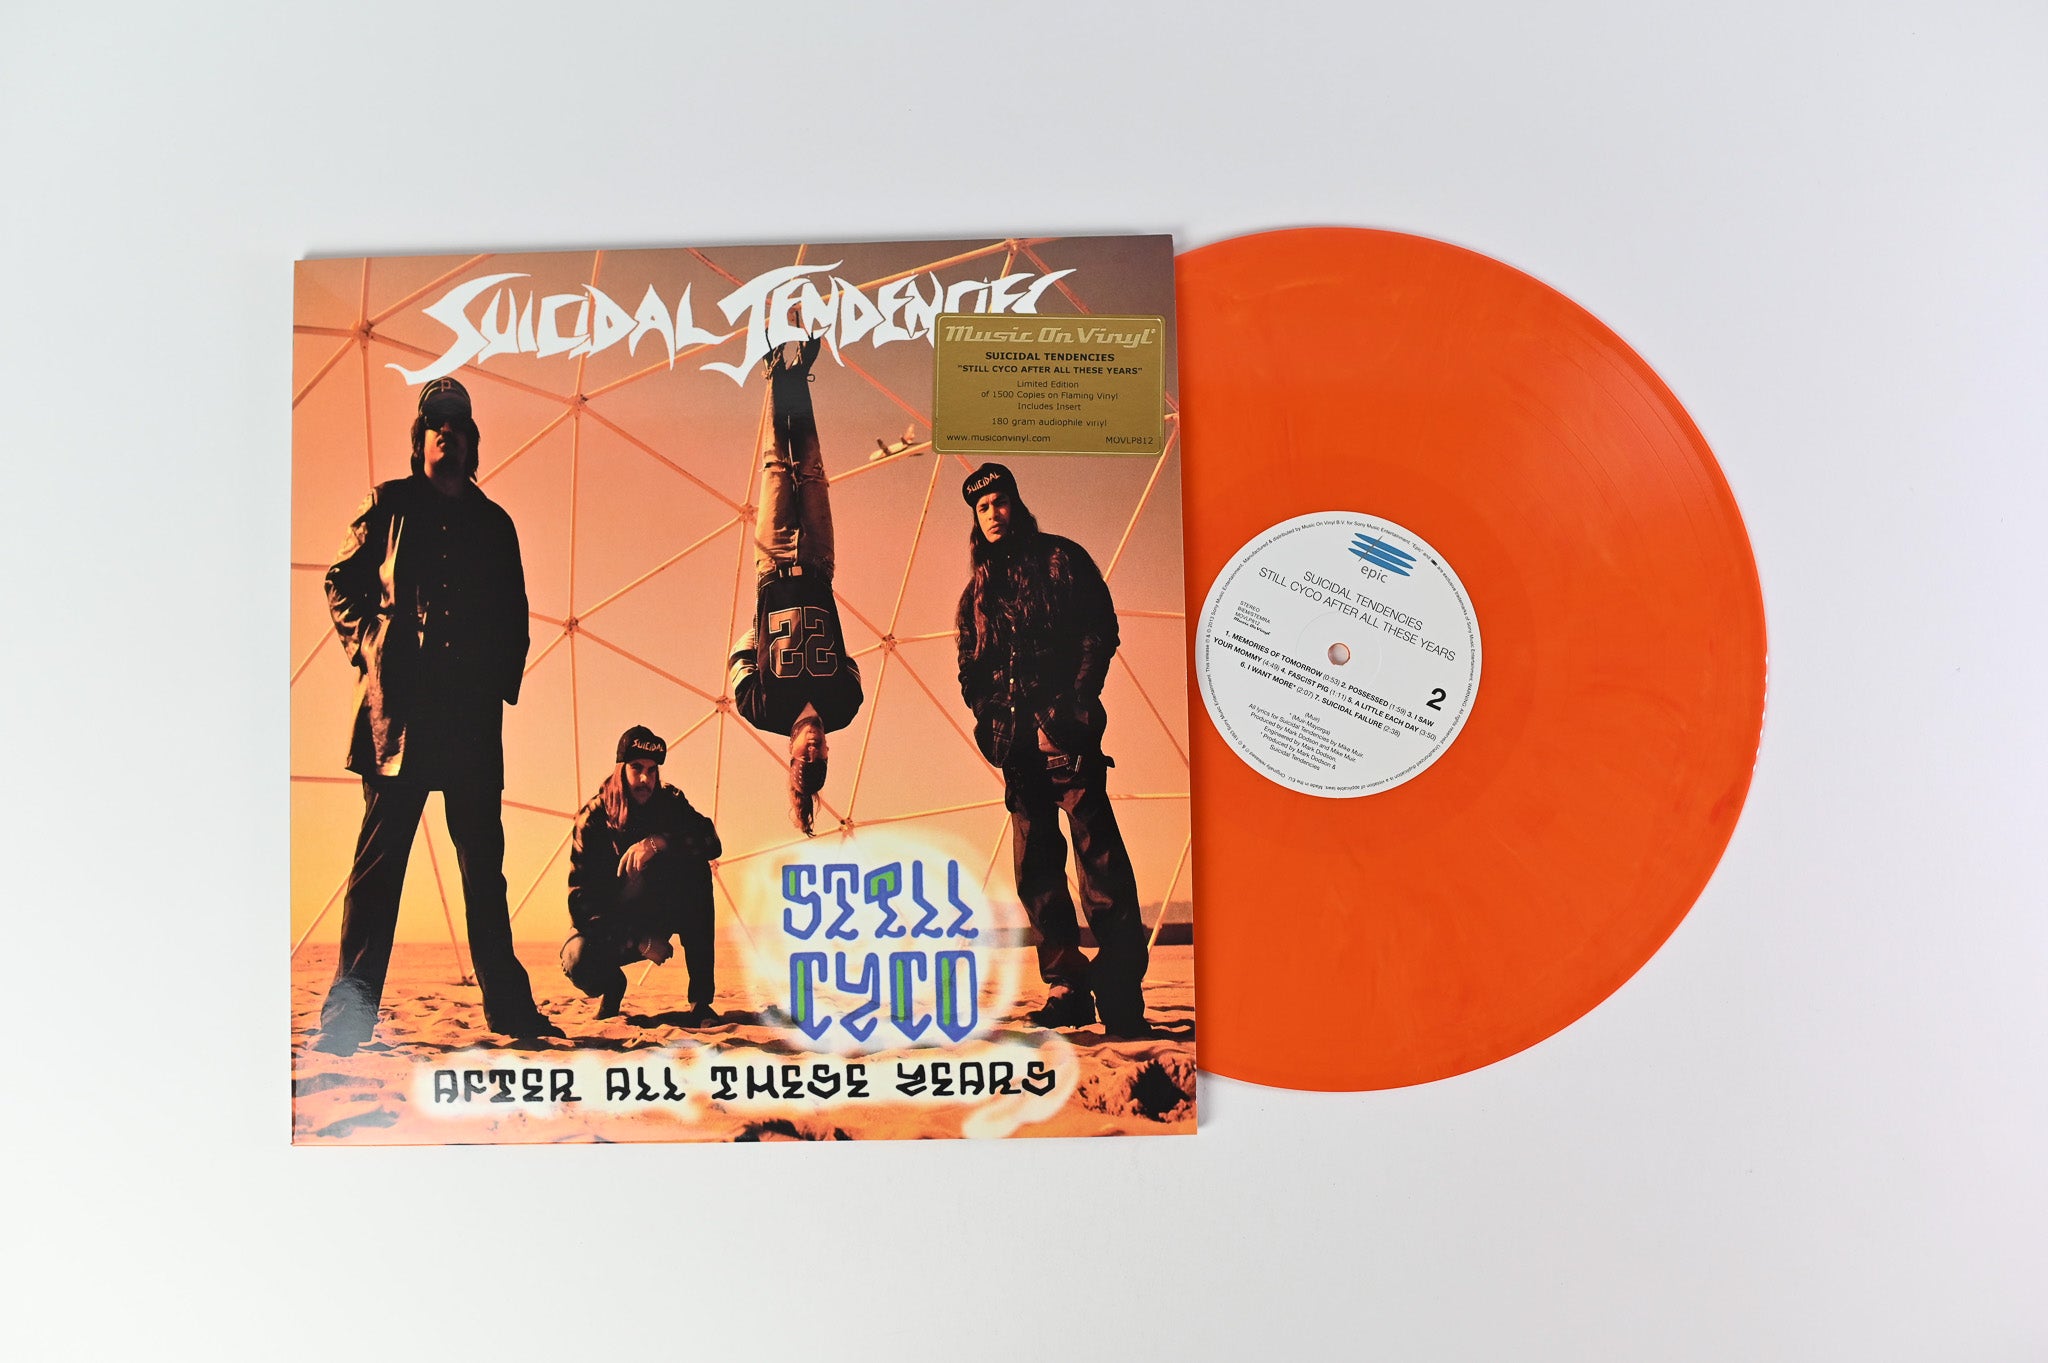 Suicidal Tendencies - Still Cyco After All These Years on Epic Ltd Numbered Flaming Vinyl Reissue